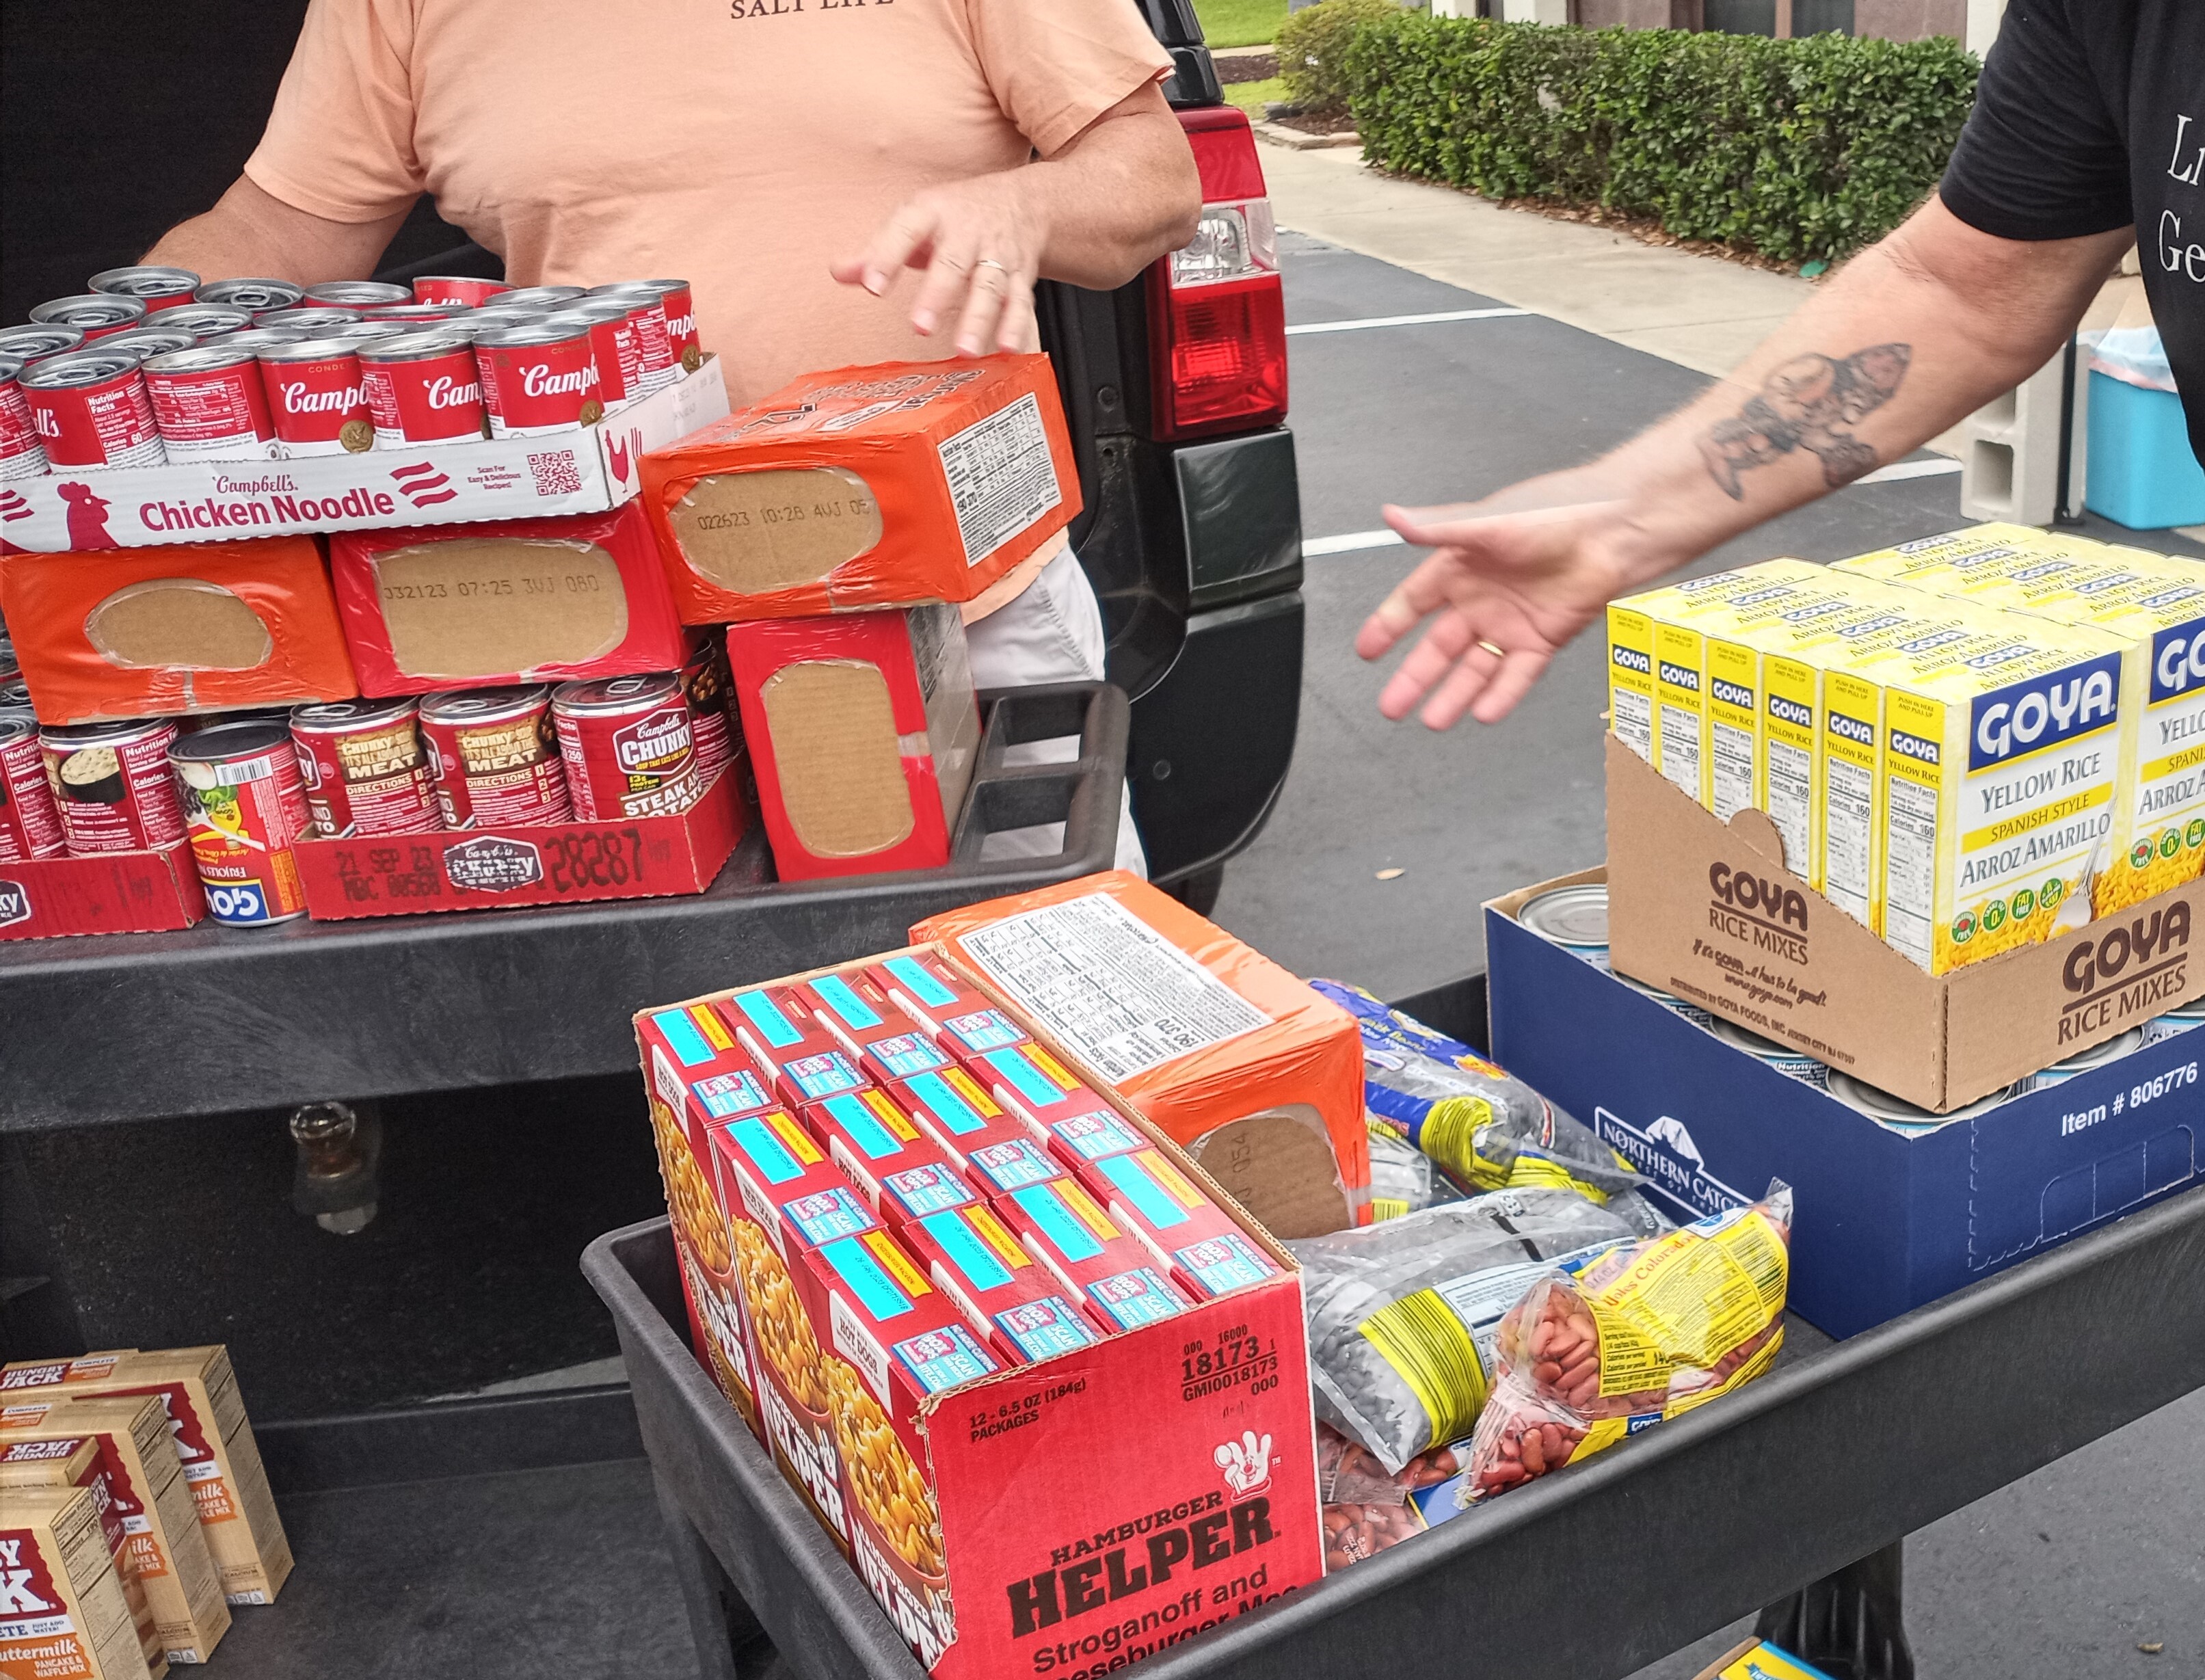 Donated food